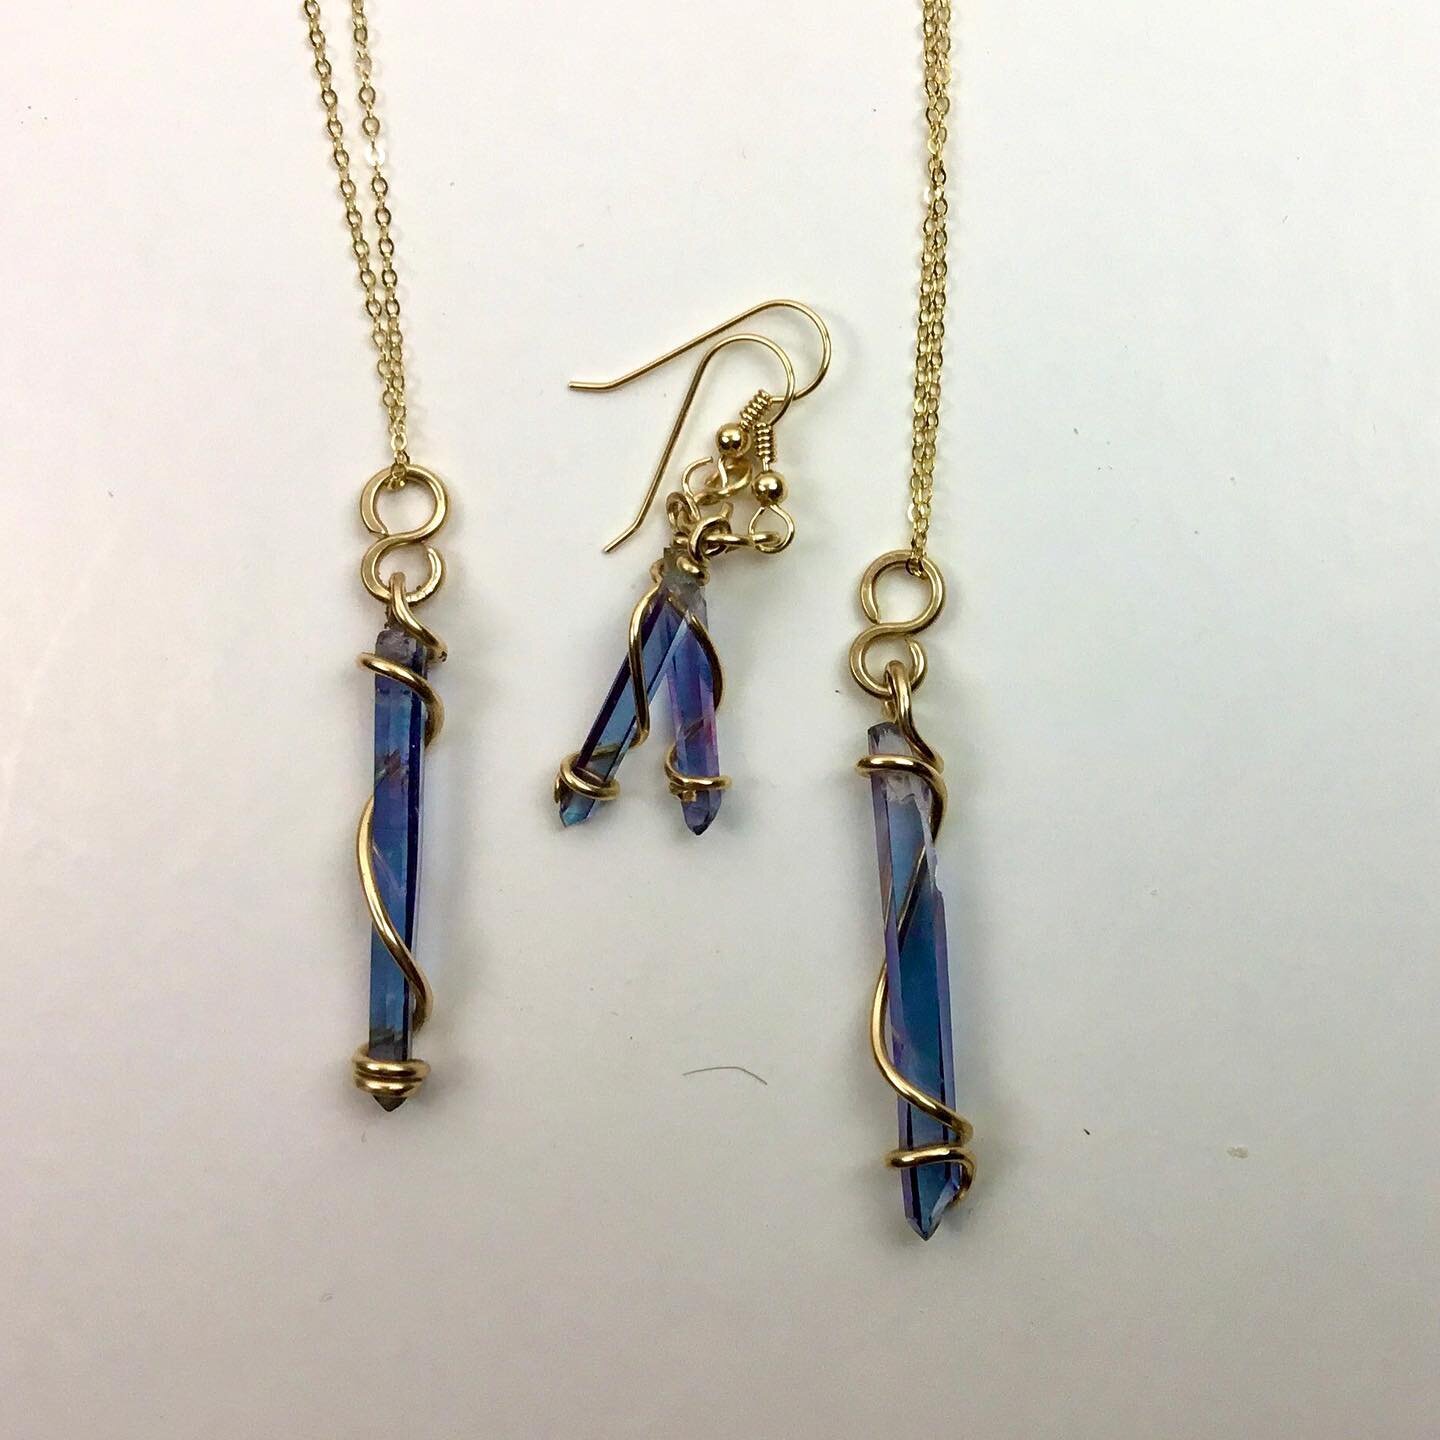 Aqua Aura in gold filled wire. This is translucent blue quartz, a fact for fully appreciated by my lens.